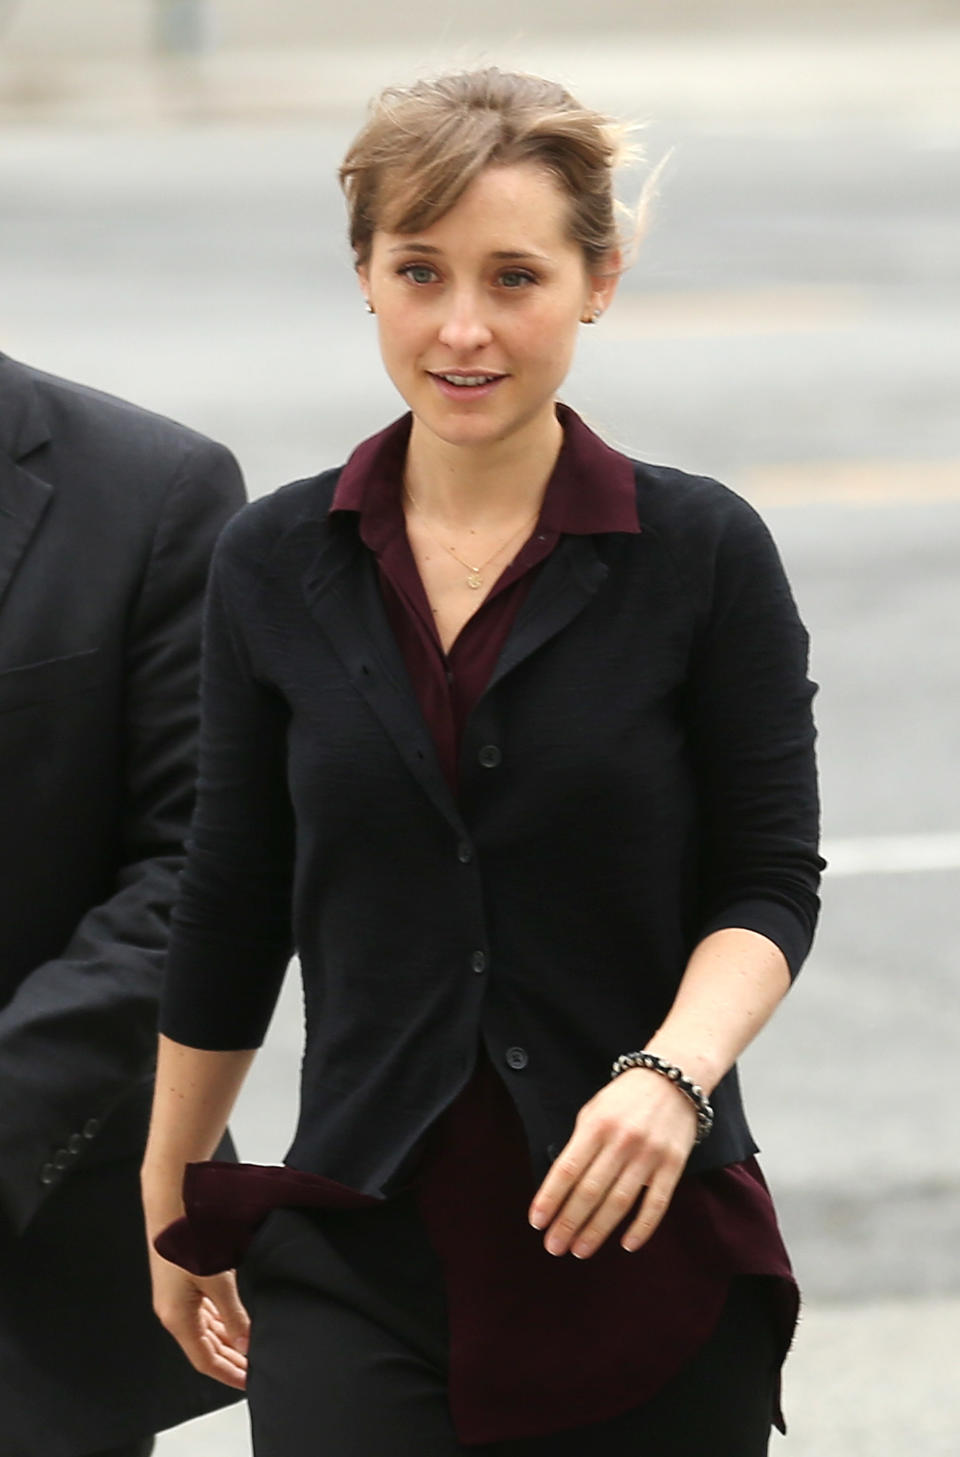 BROOKLYN, NY - MAY 04:  Actress Allison Mack arrives at the United States Eastern District Court after a bail hearing in relation to the sex trafficking charges filed against her on May 4, 2018 in the Brooklyn borough of New York City. The actress known for her role on 'Smallville' is charged with sex trafficking. Along with alleged cult leader Keith Raniere, prosecutors say Mack recruited women to a upstate New york mentorship group NXIVM that turned them into sex slaves.  (Photo by Jemal Countess/Getty Images)